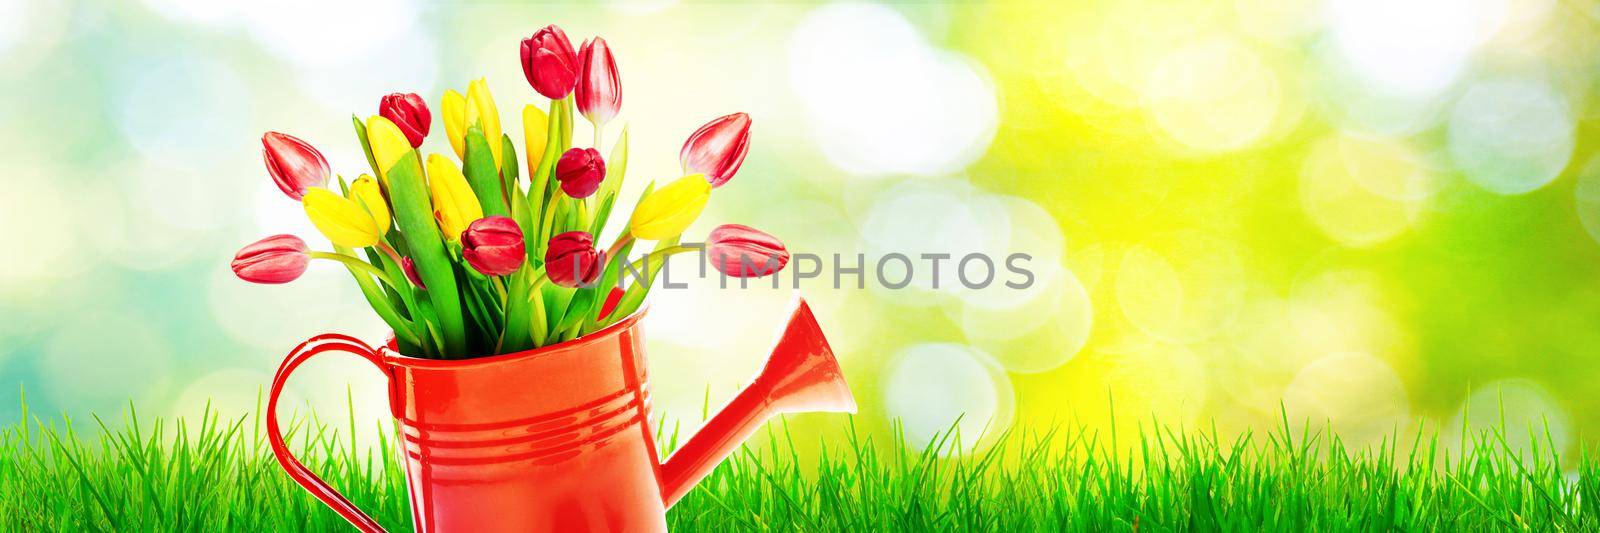 Spring flowers in watering can. Gardening tools and equipment.